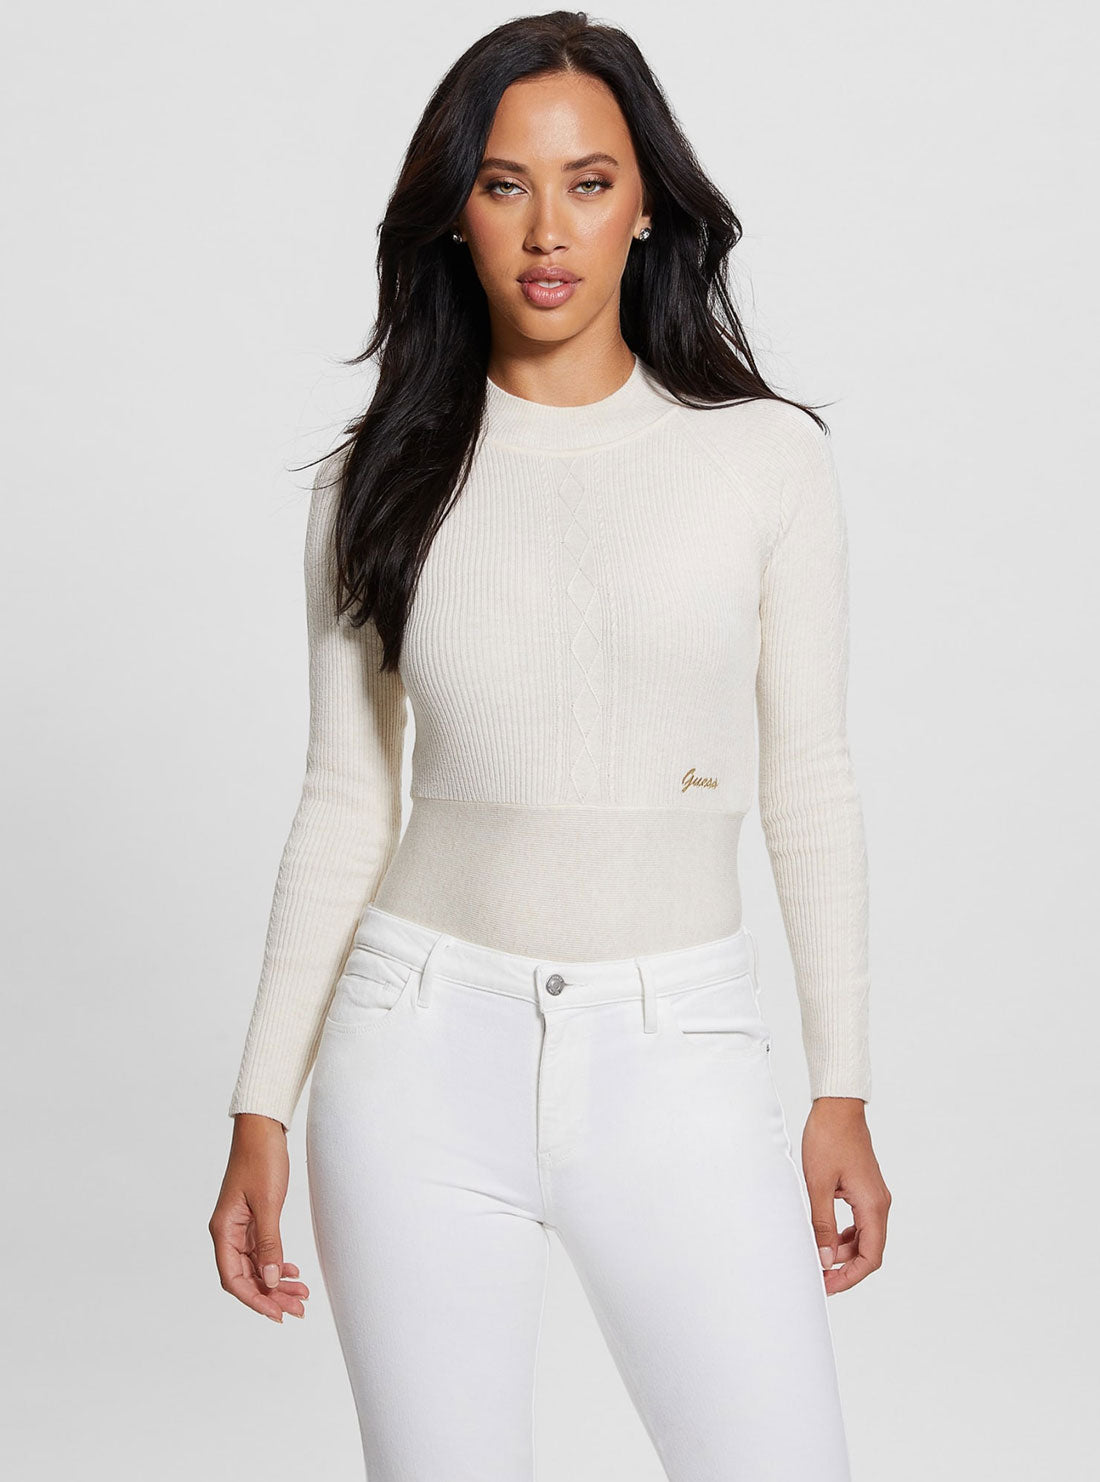 White Melodie Long Sleeve Knit Top | GUESS Women's Apparel | front view